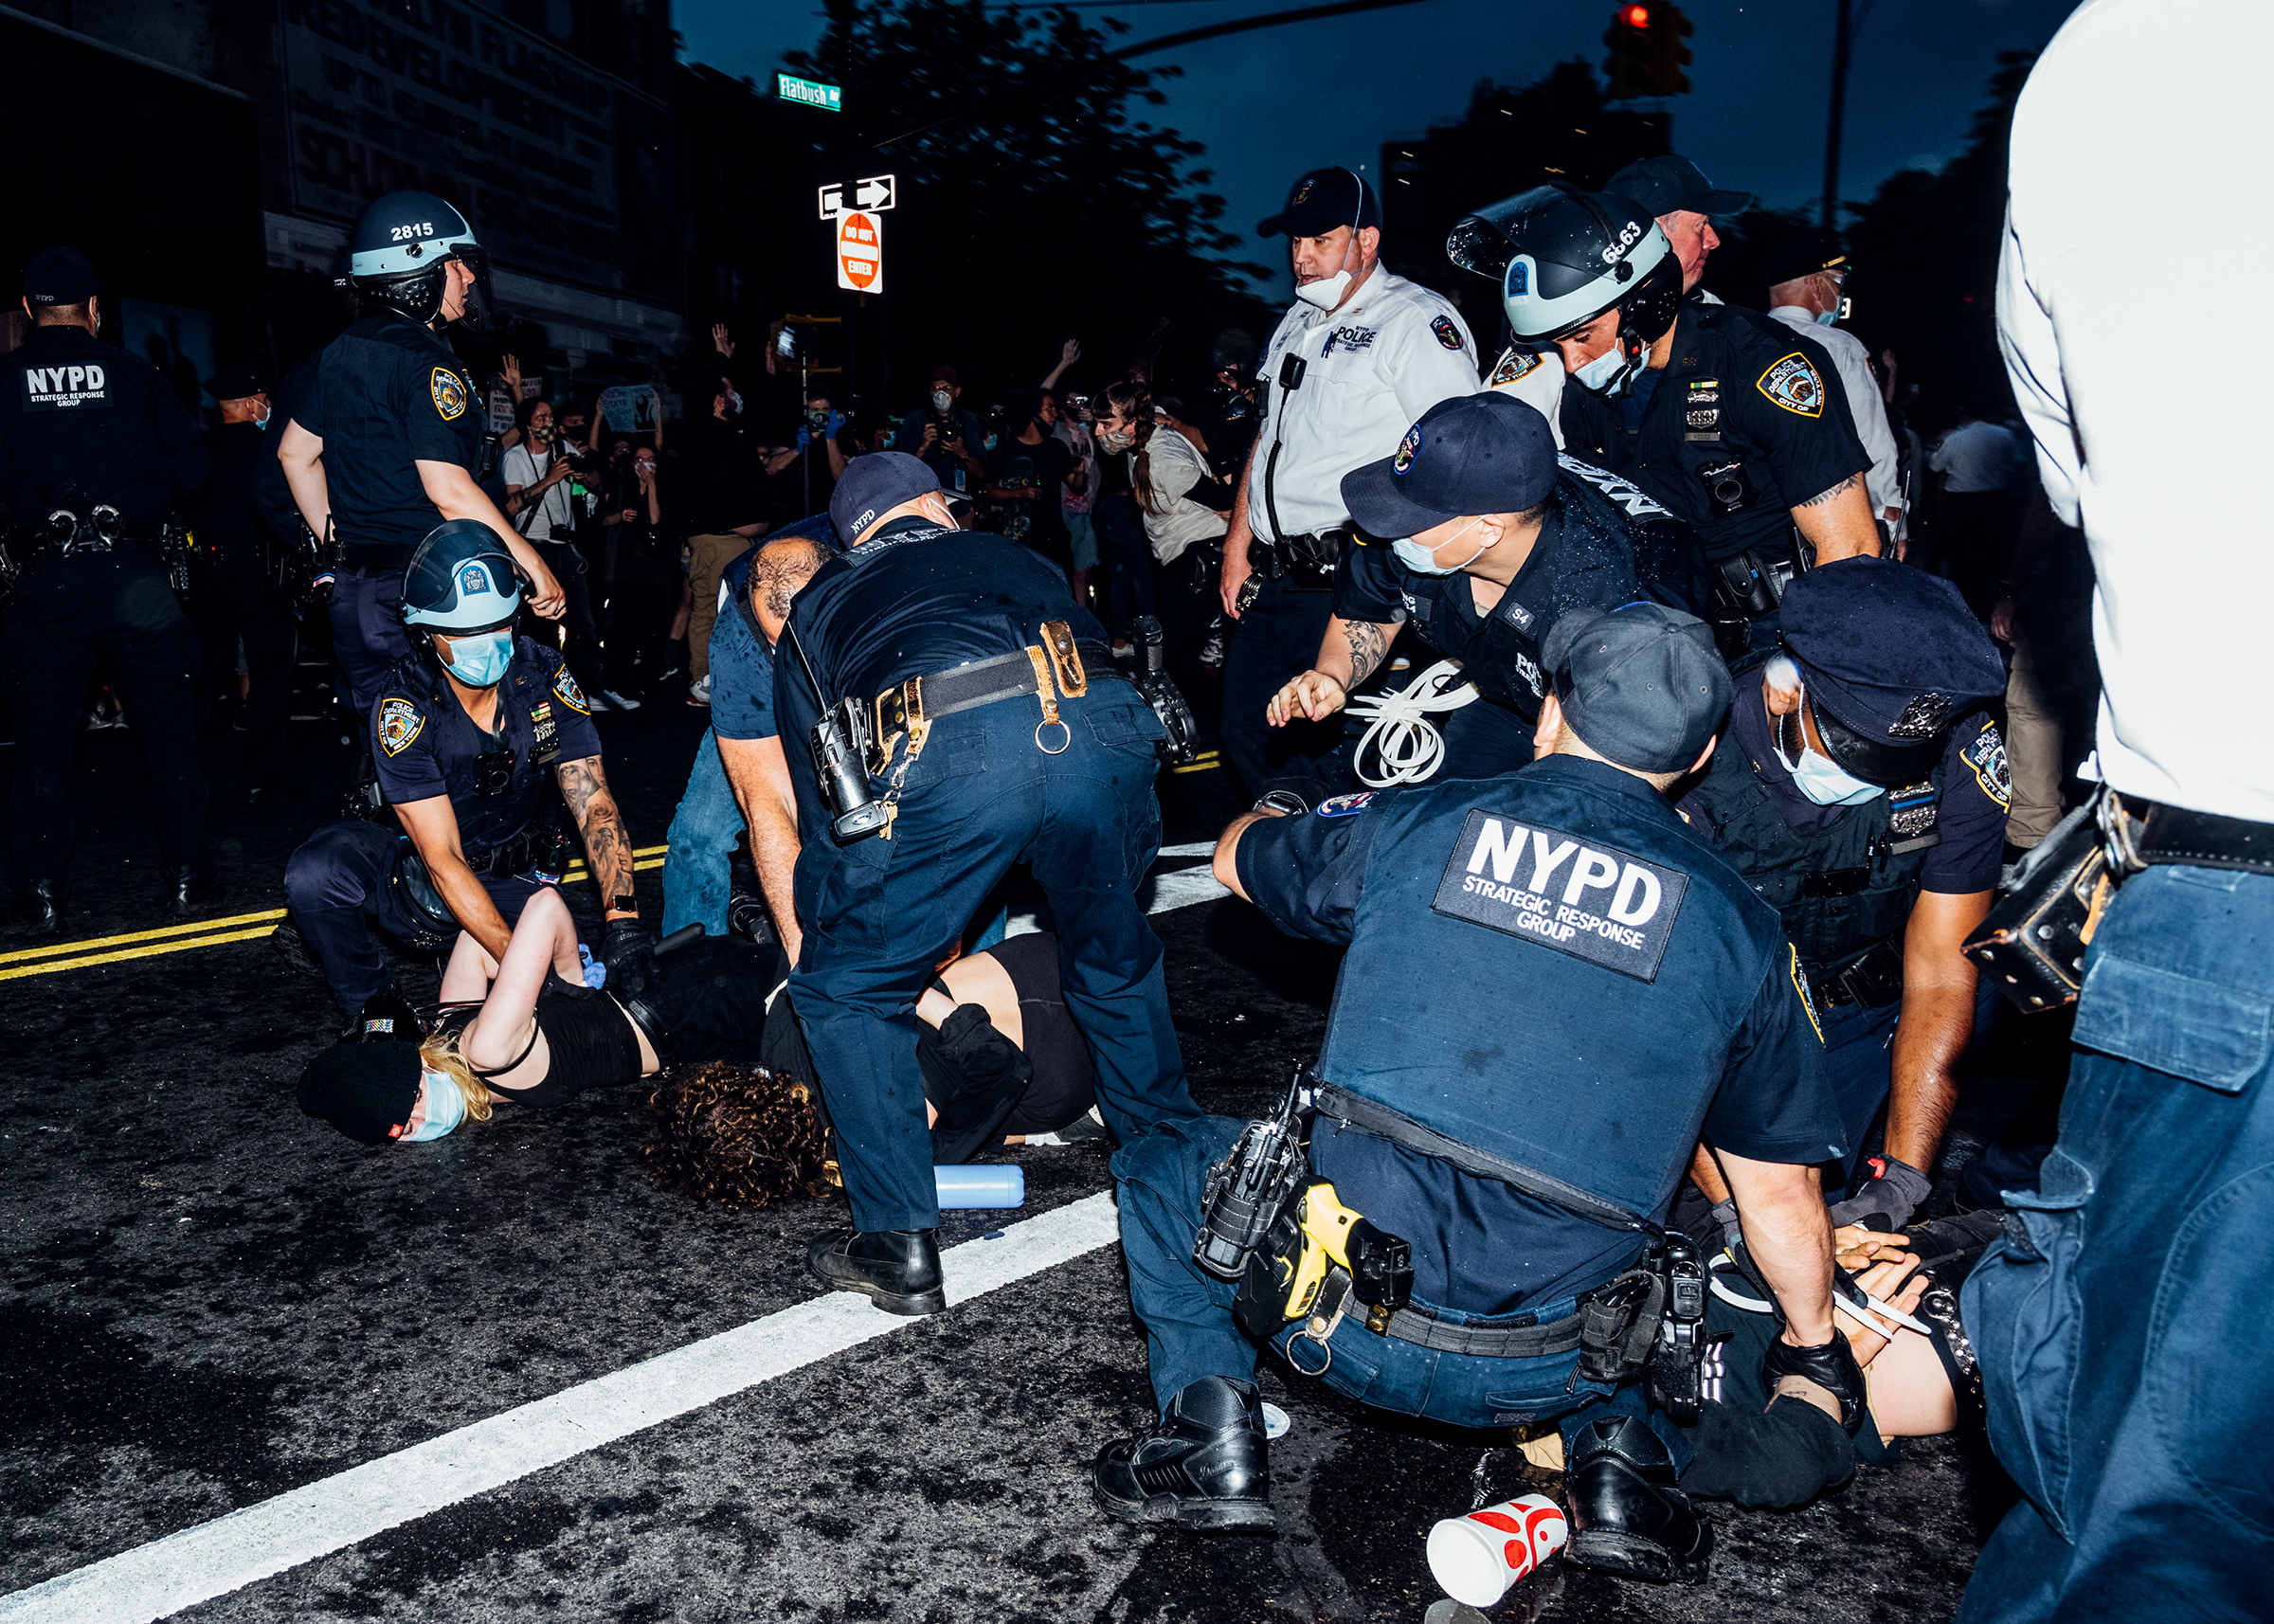 Demonstrators are detained during a protest near Brooklyn's Barclays Center on May 29. (Malike Sidibe for TIME)